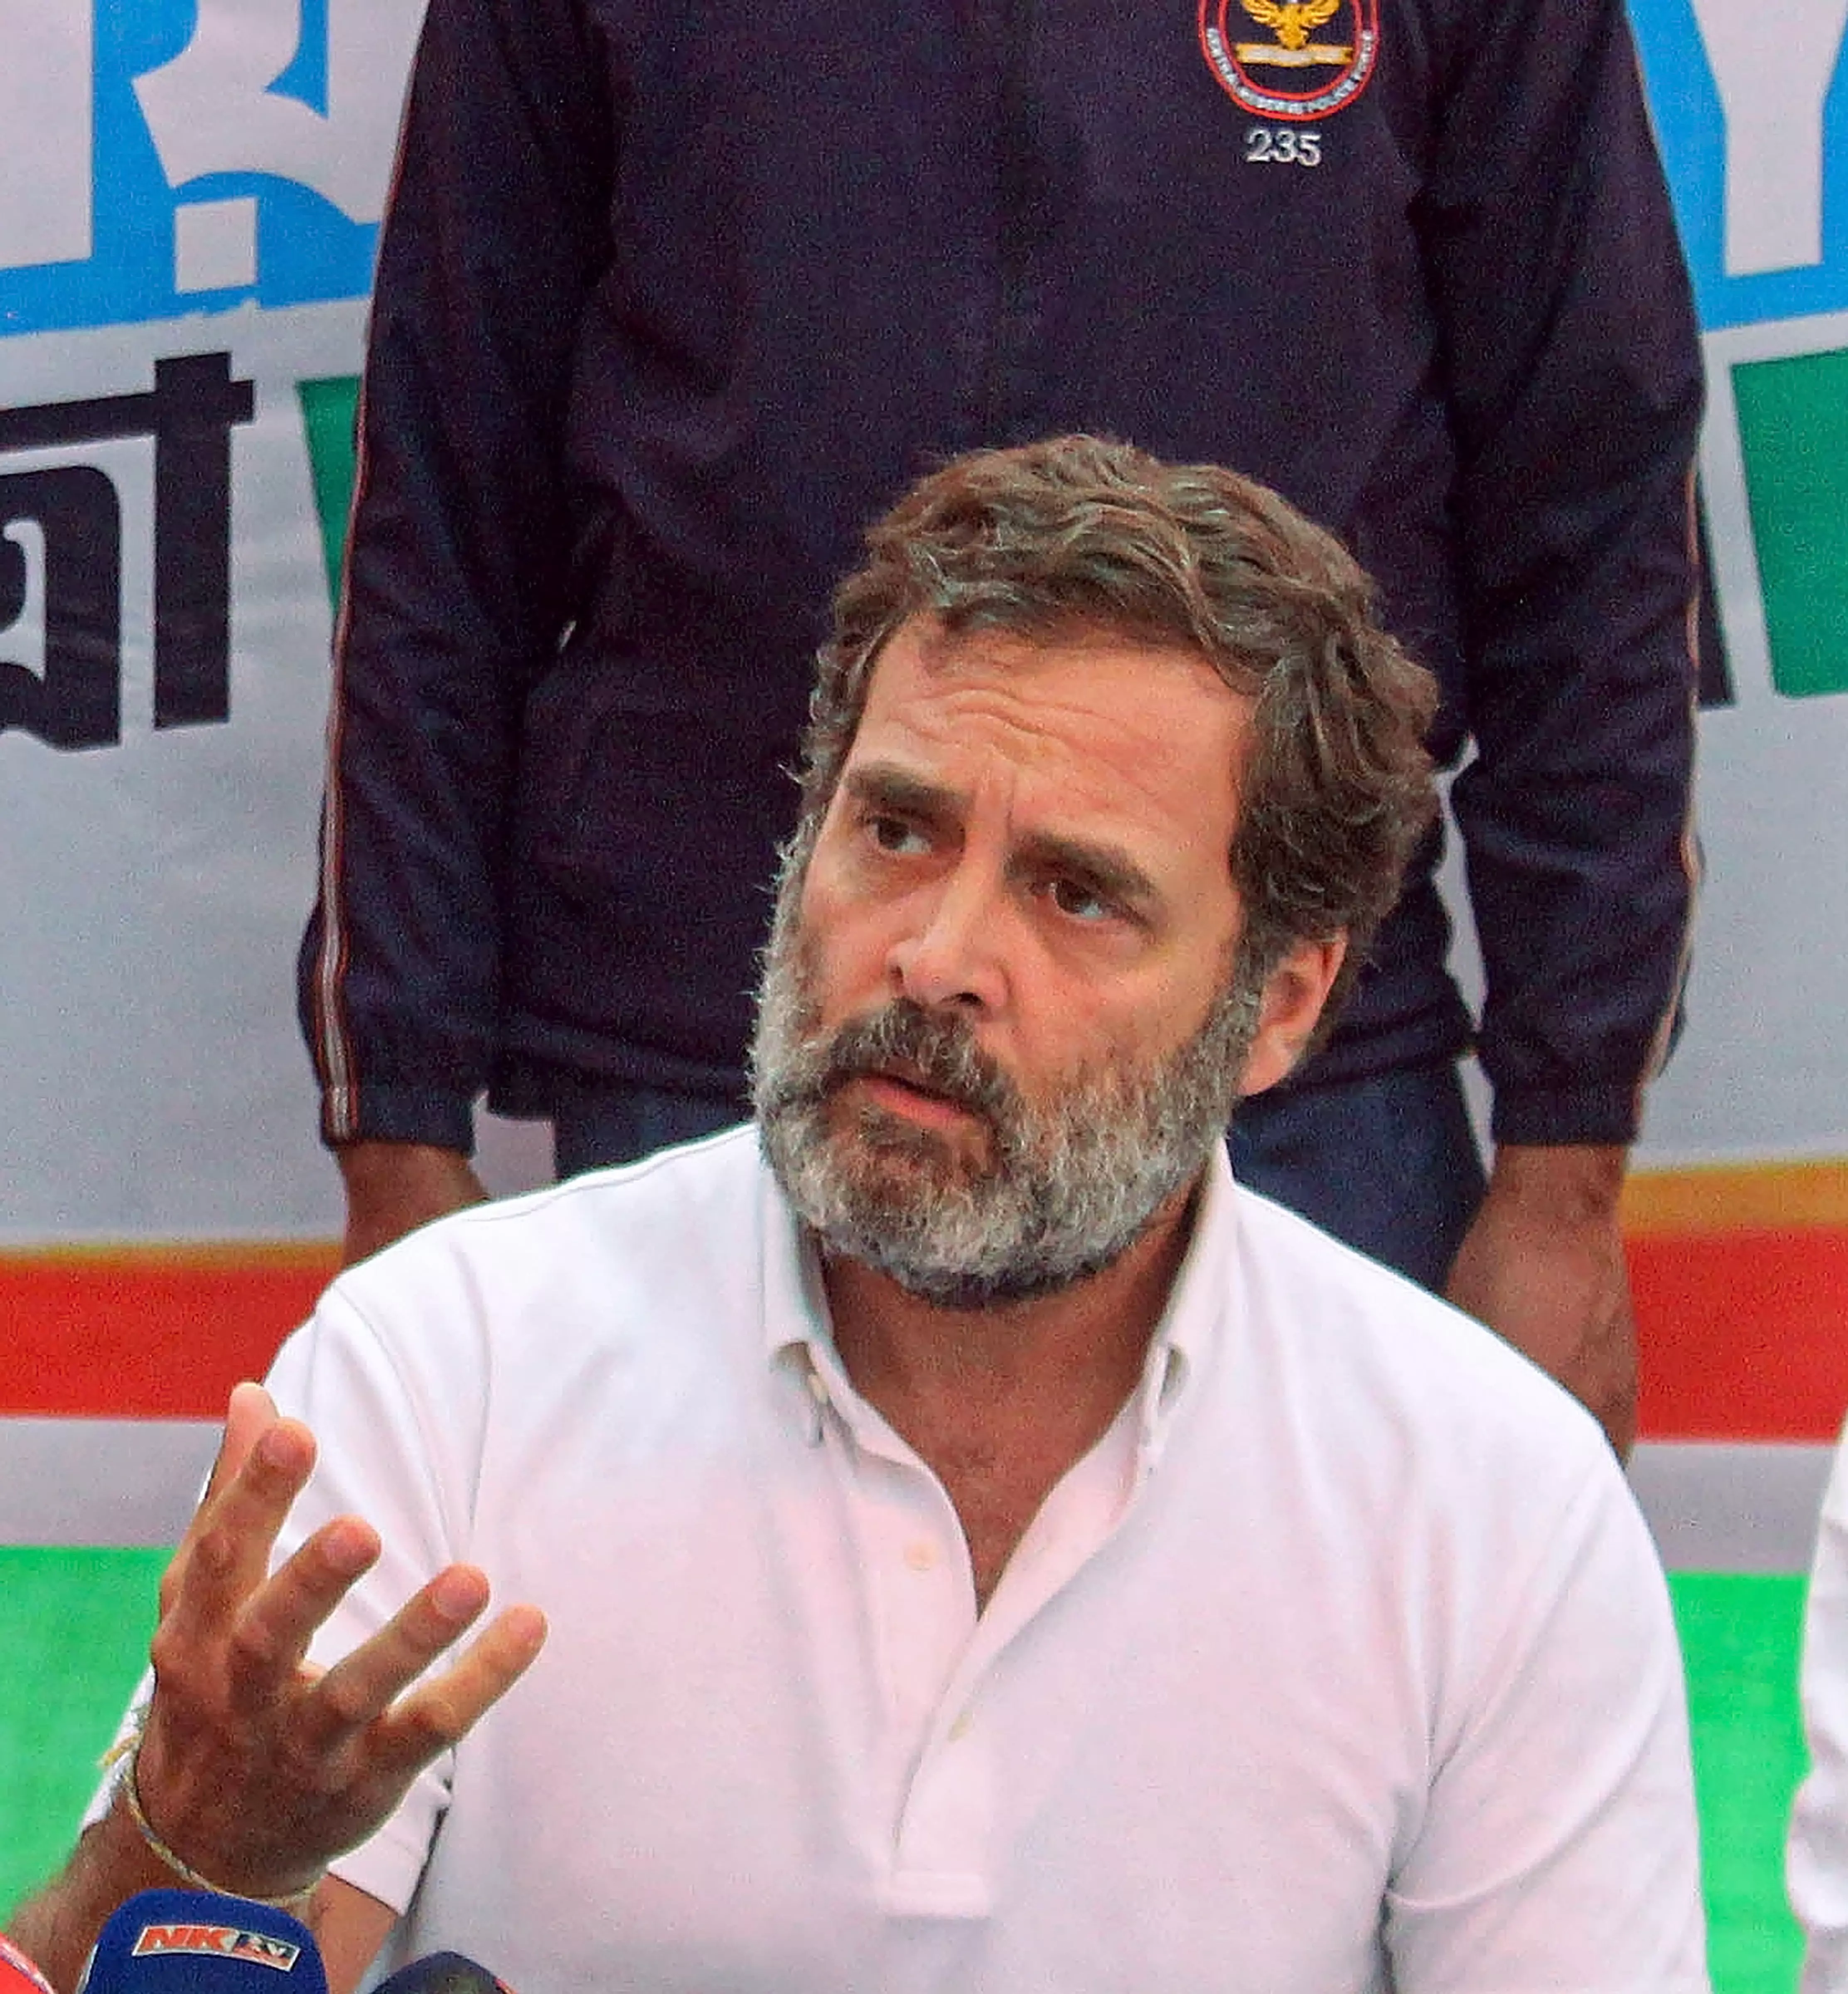 RSS trying to make everybody blindly obedient, the answer is resistance: Rahul Gandhi